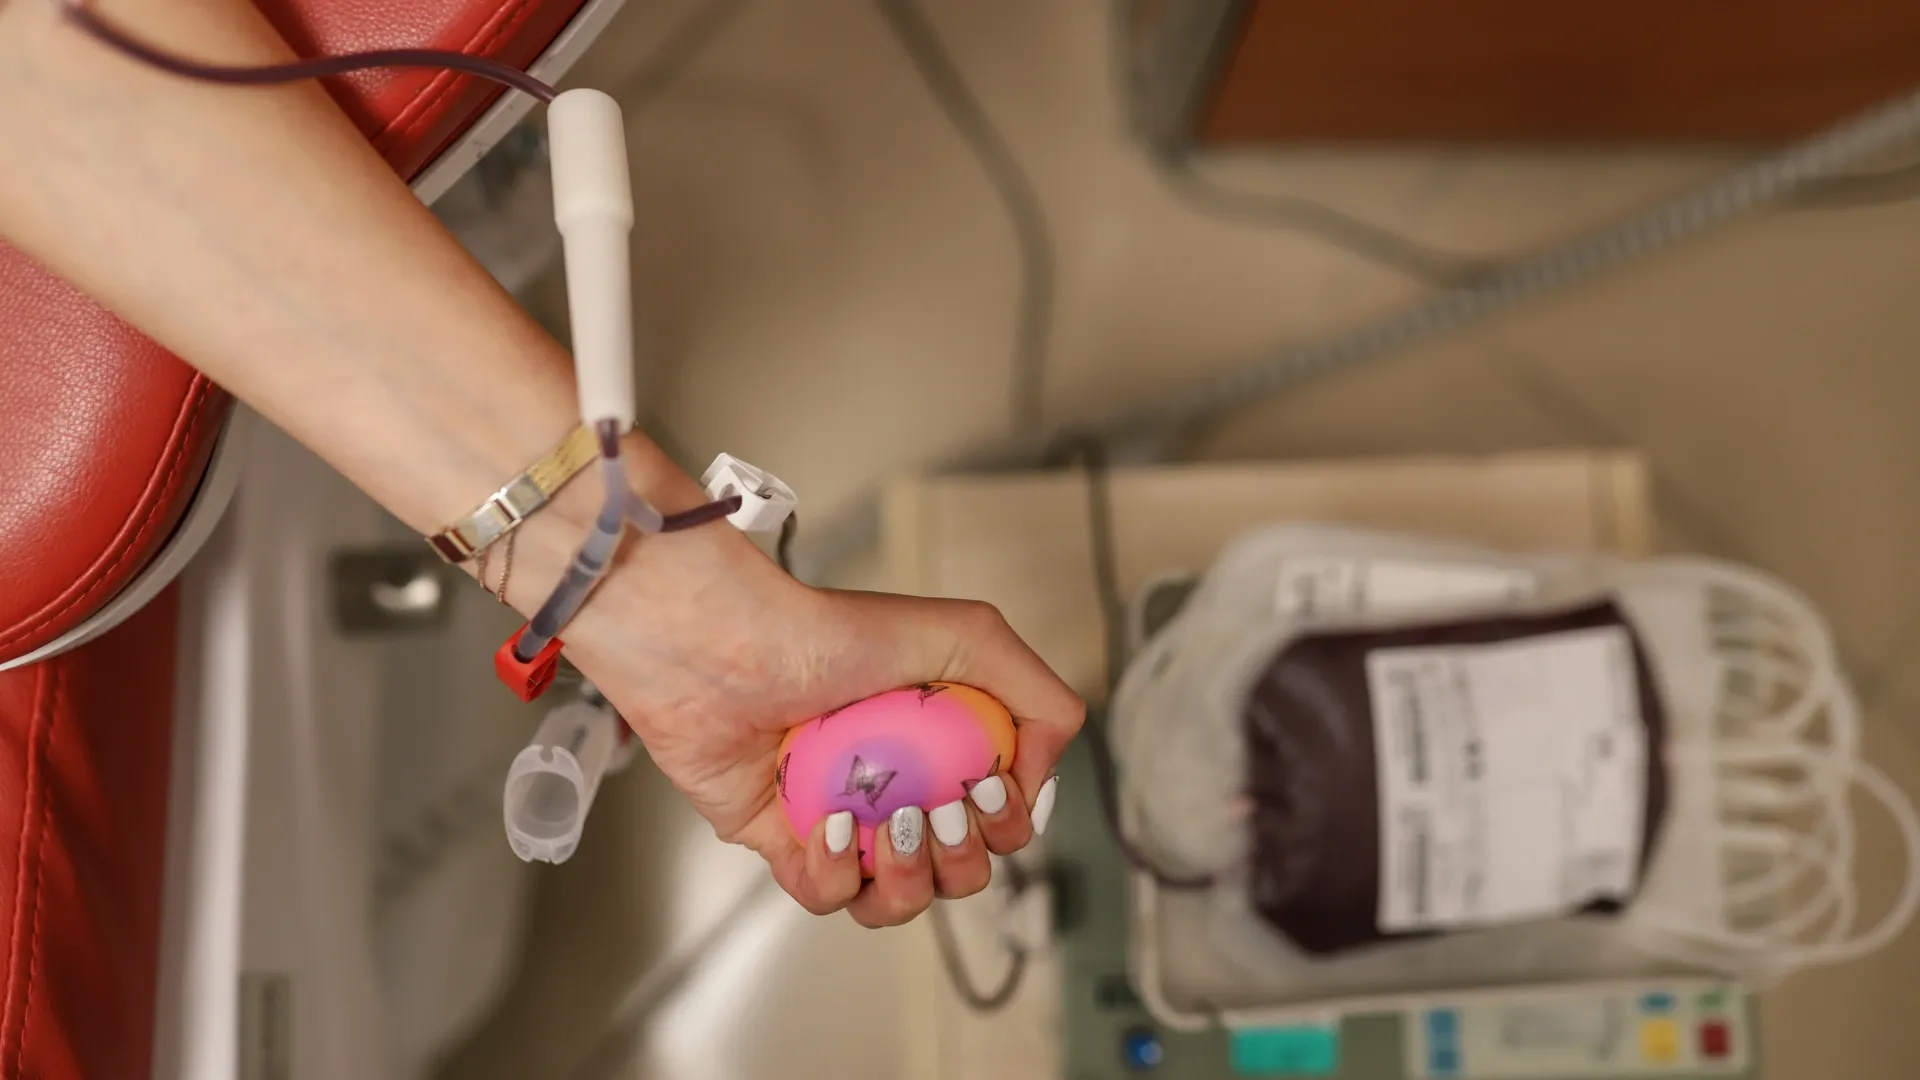 How to encourage employees for blood donation in the workplace